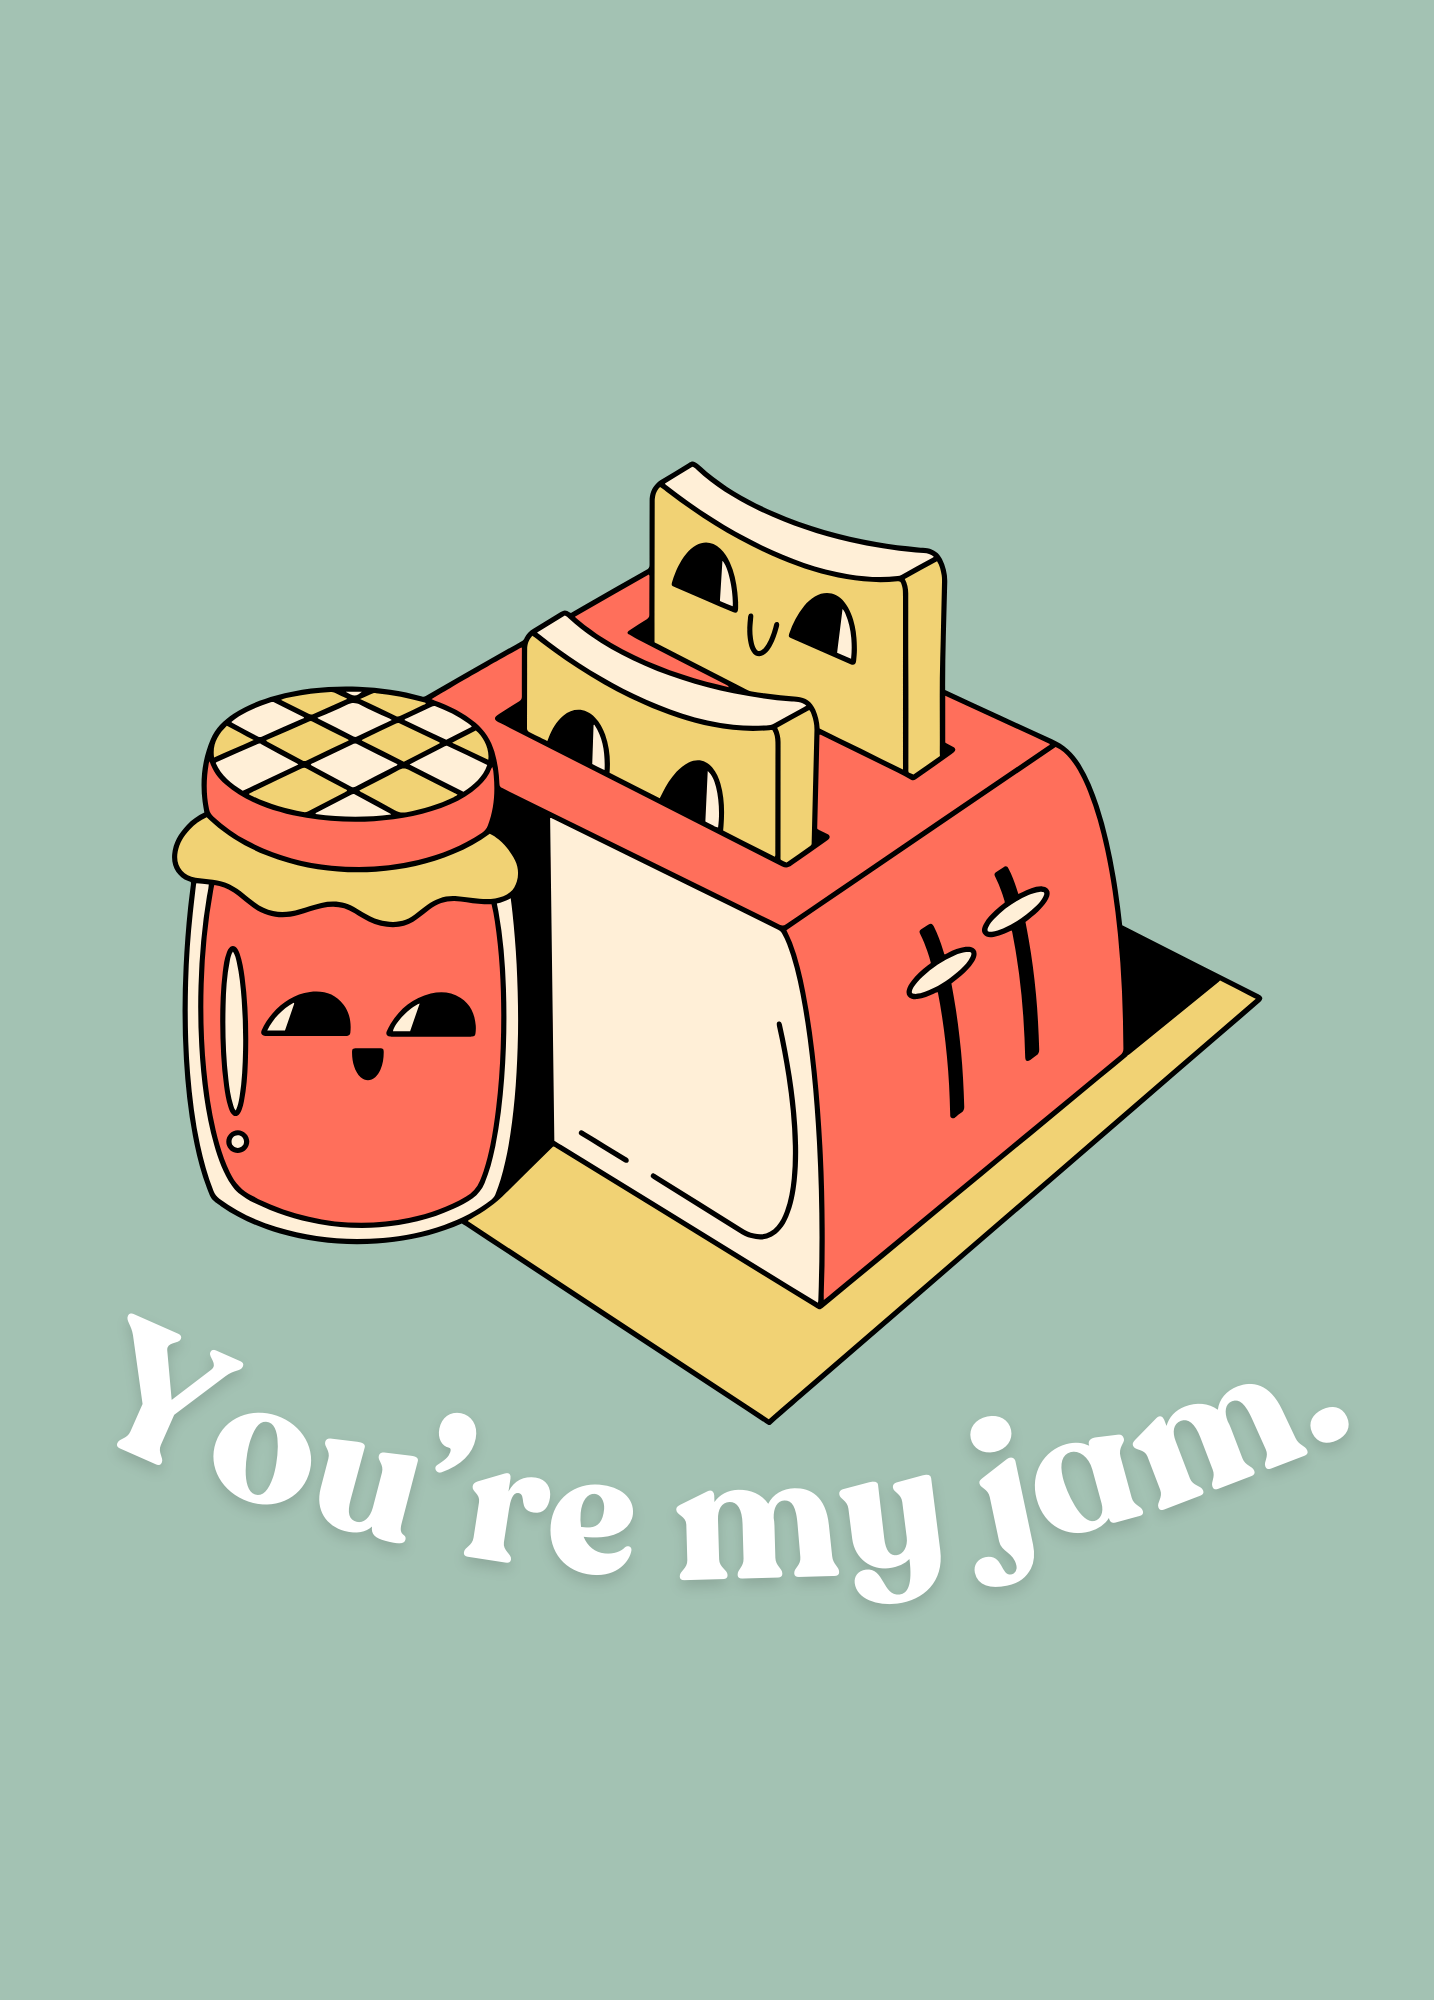 You're My Jam